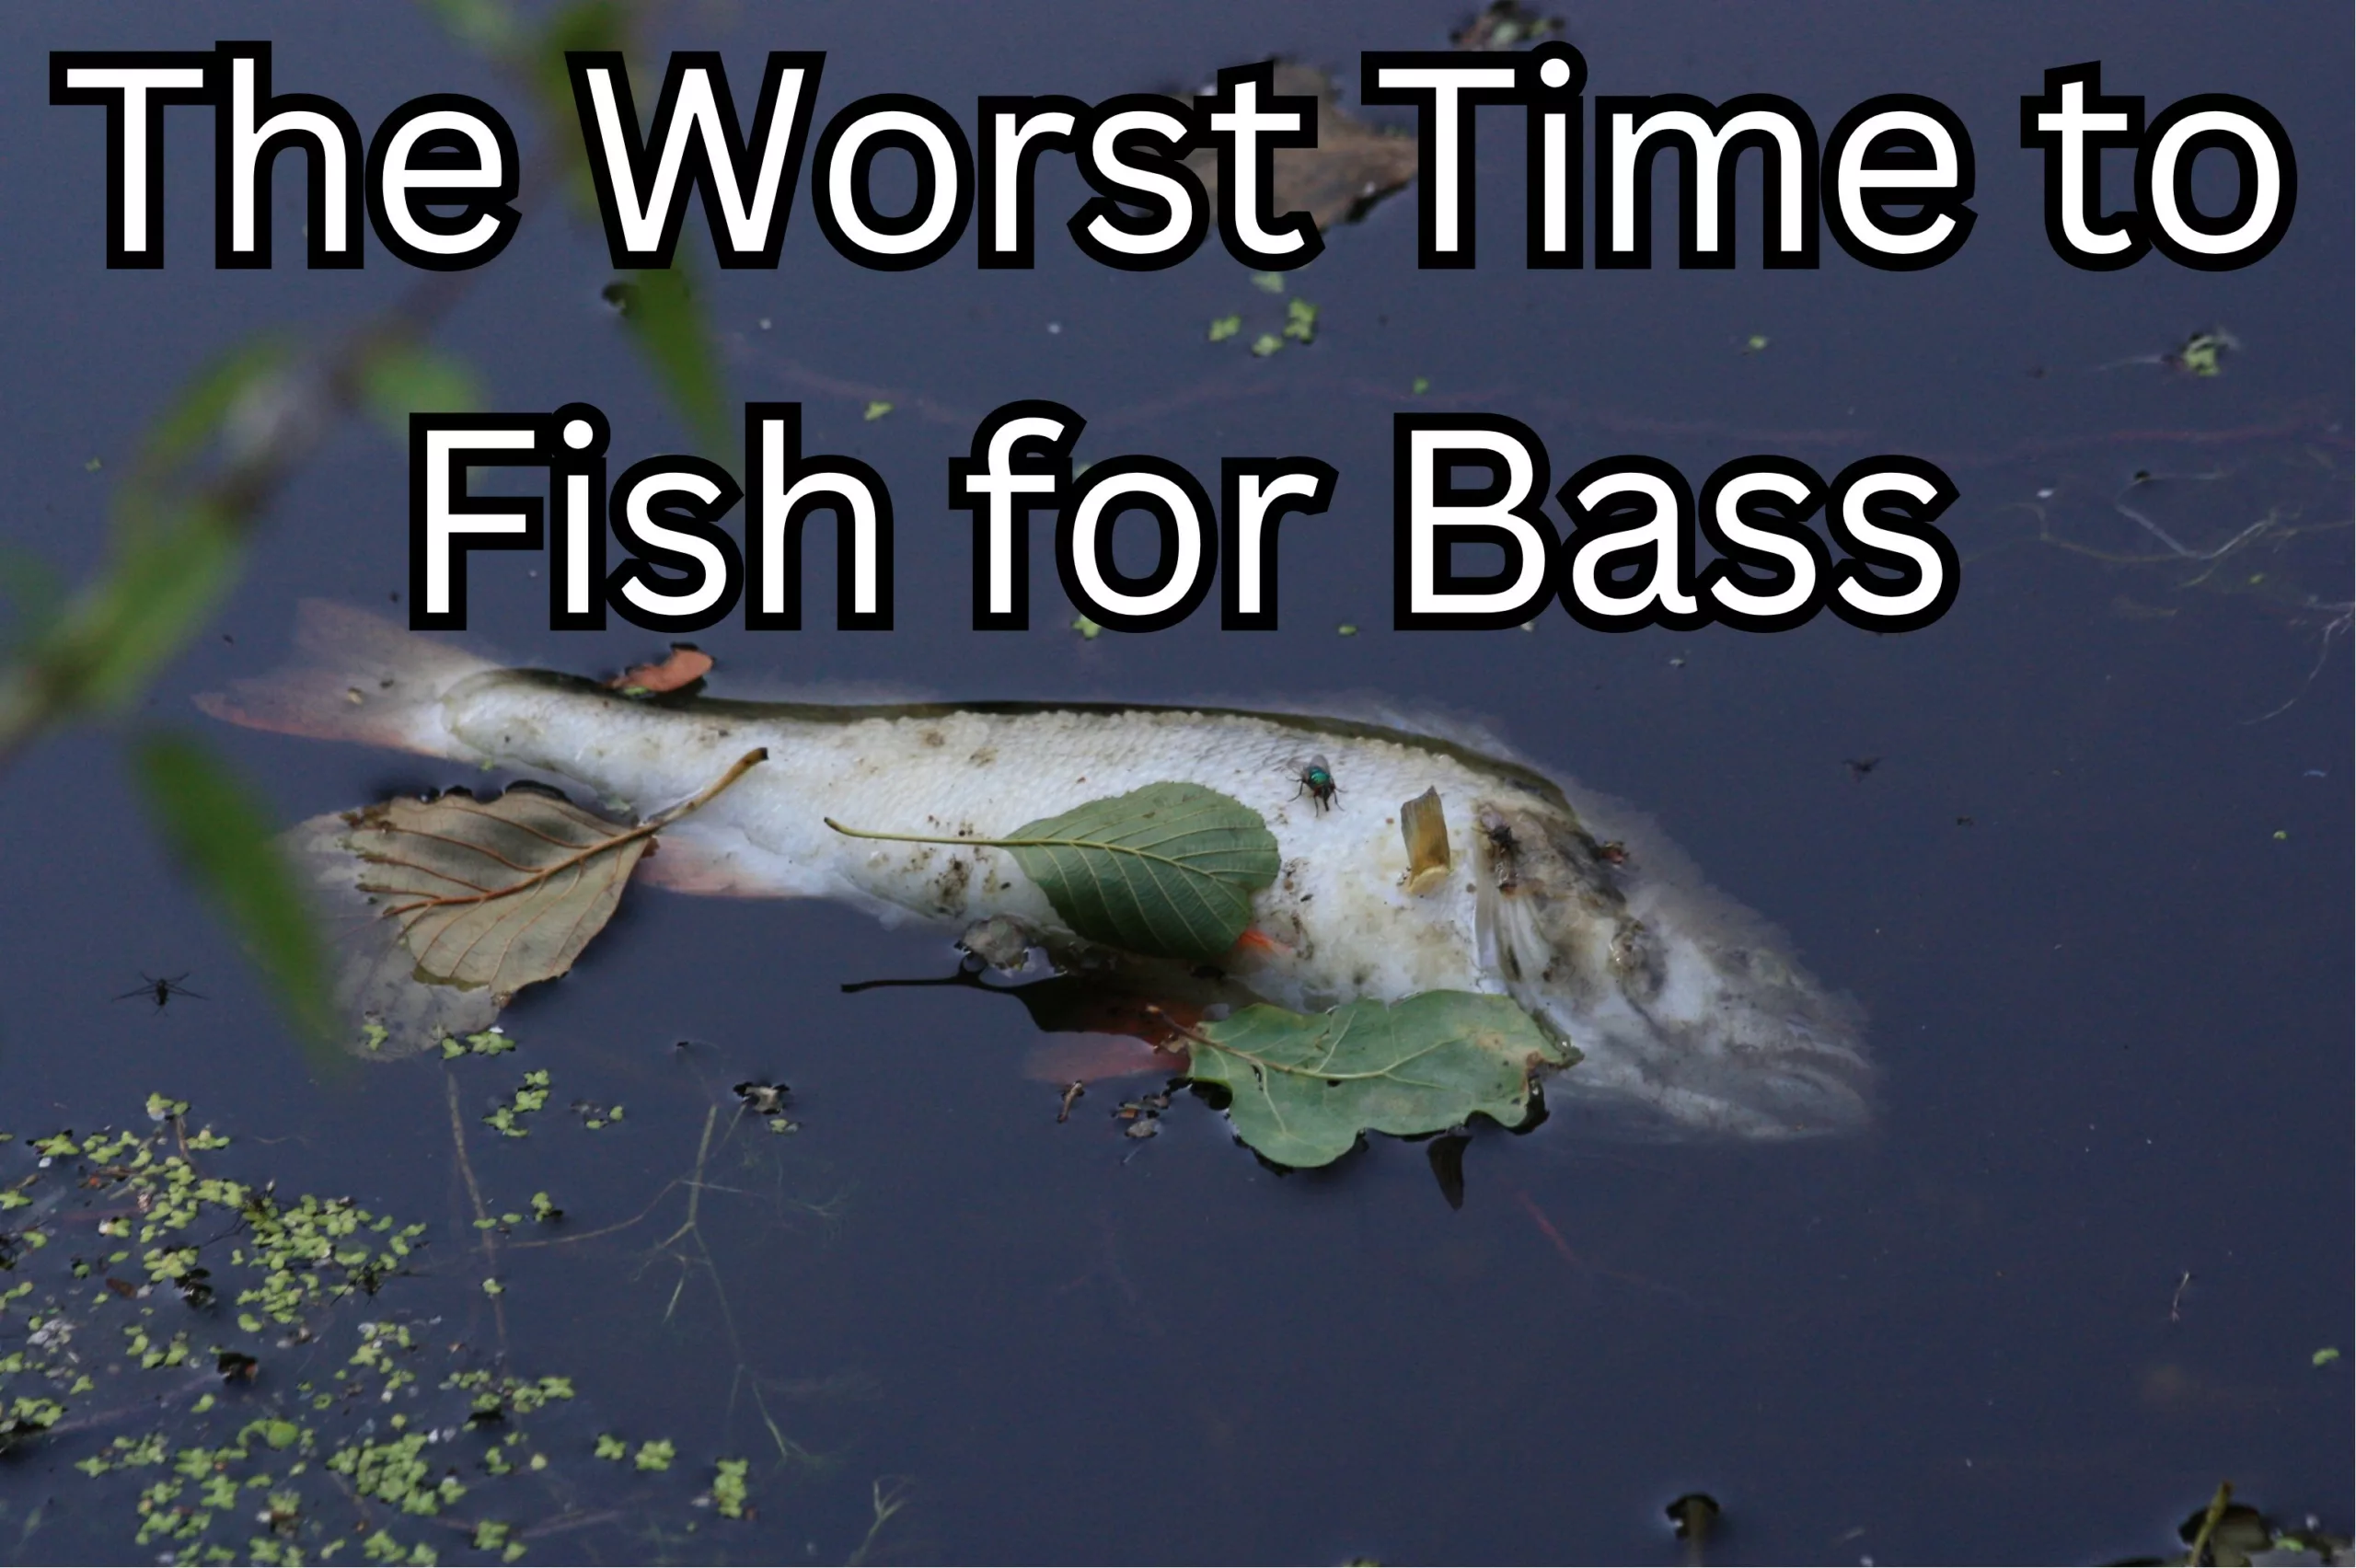 The Worst Time to Fish for Bass